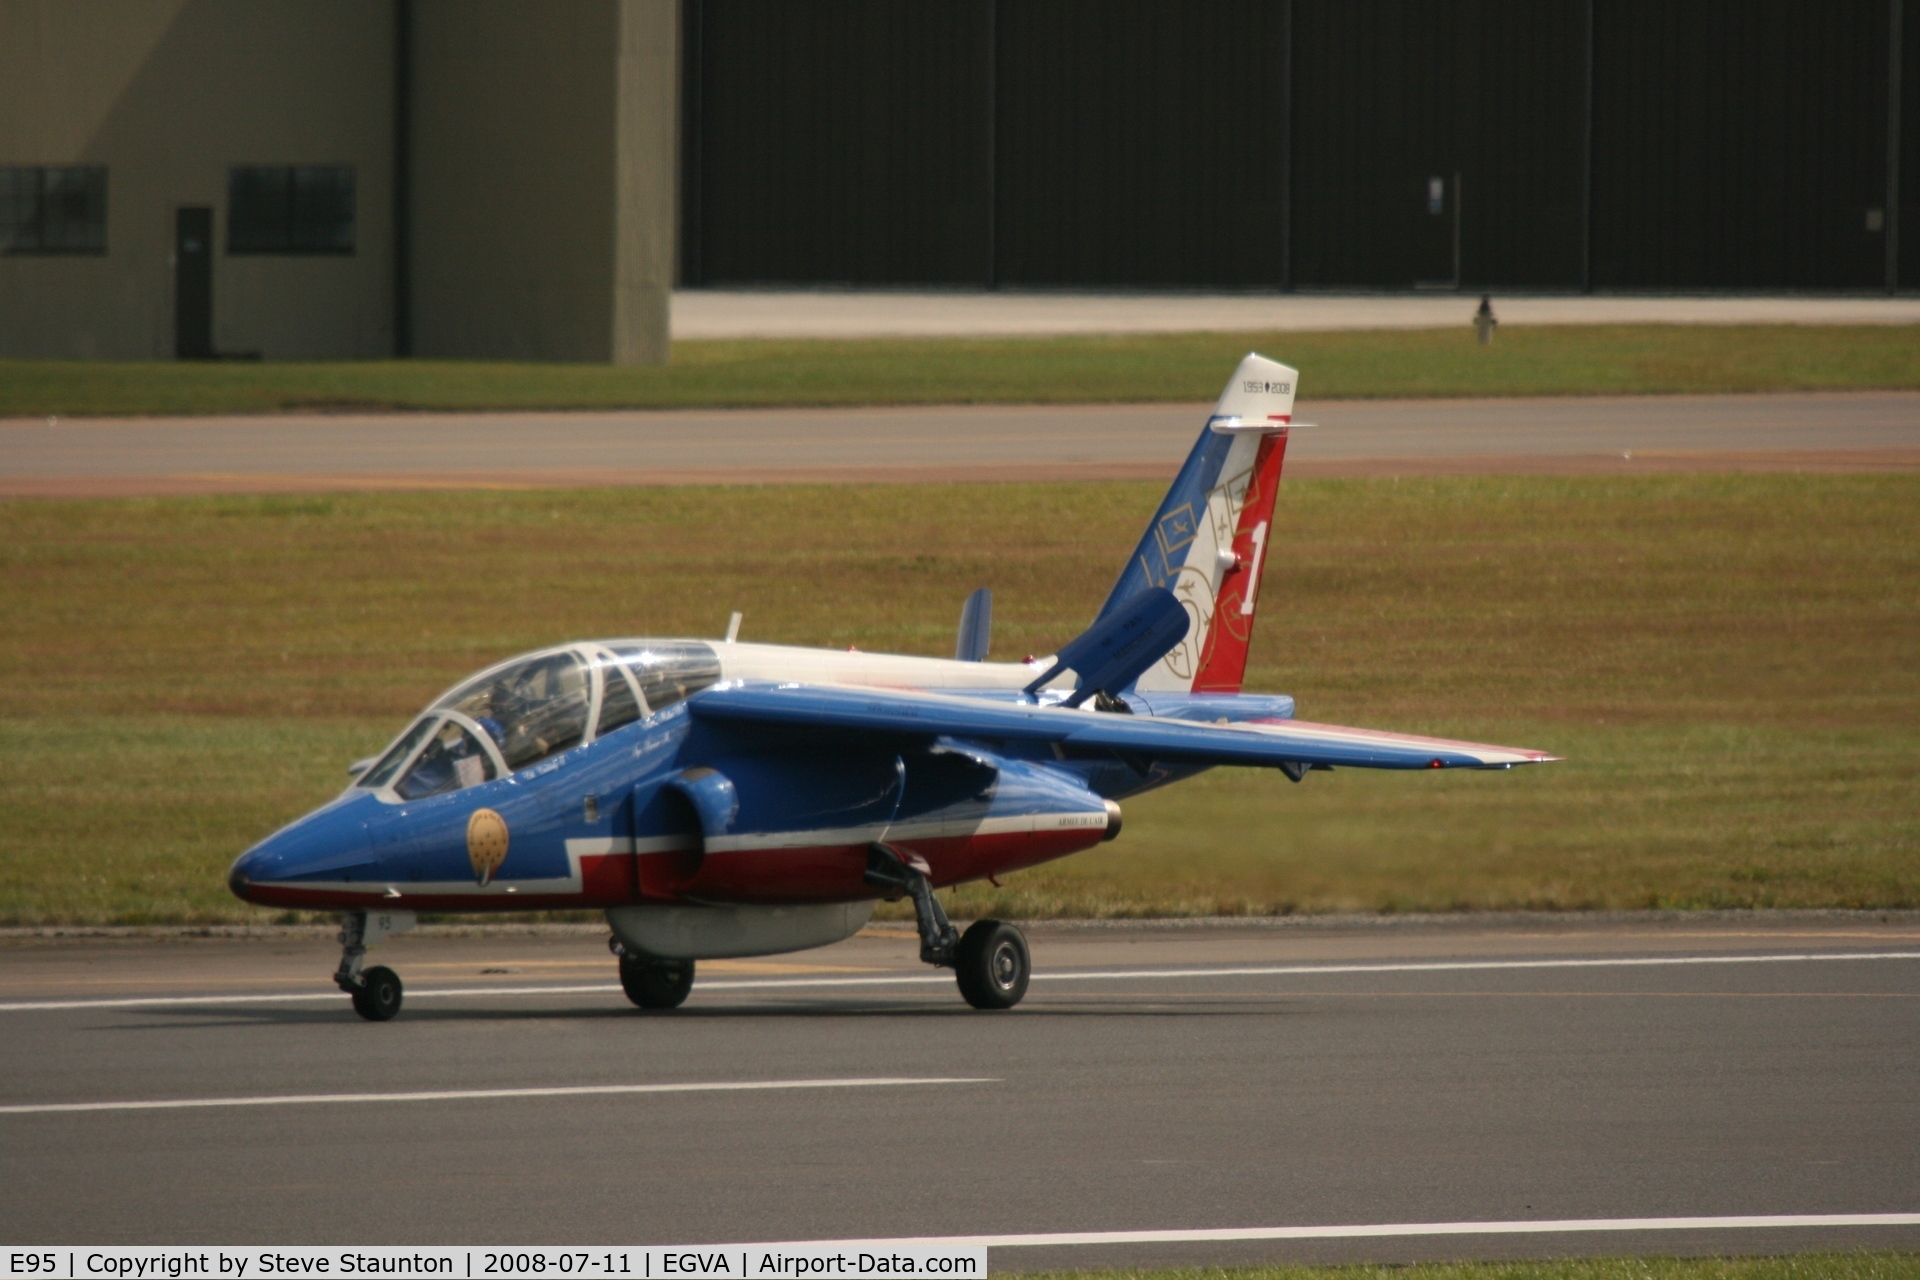 E95, Dassault-Dornier Alpha Jet E C/N E95, Taken at the Royal International Air Tattoo 2008 during arrivals and departures (show days cancelled due to bad weather)